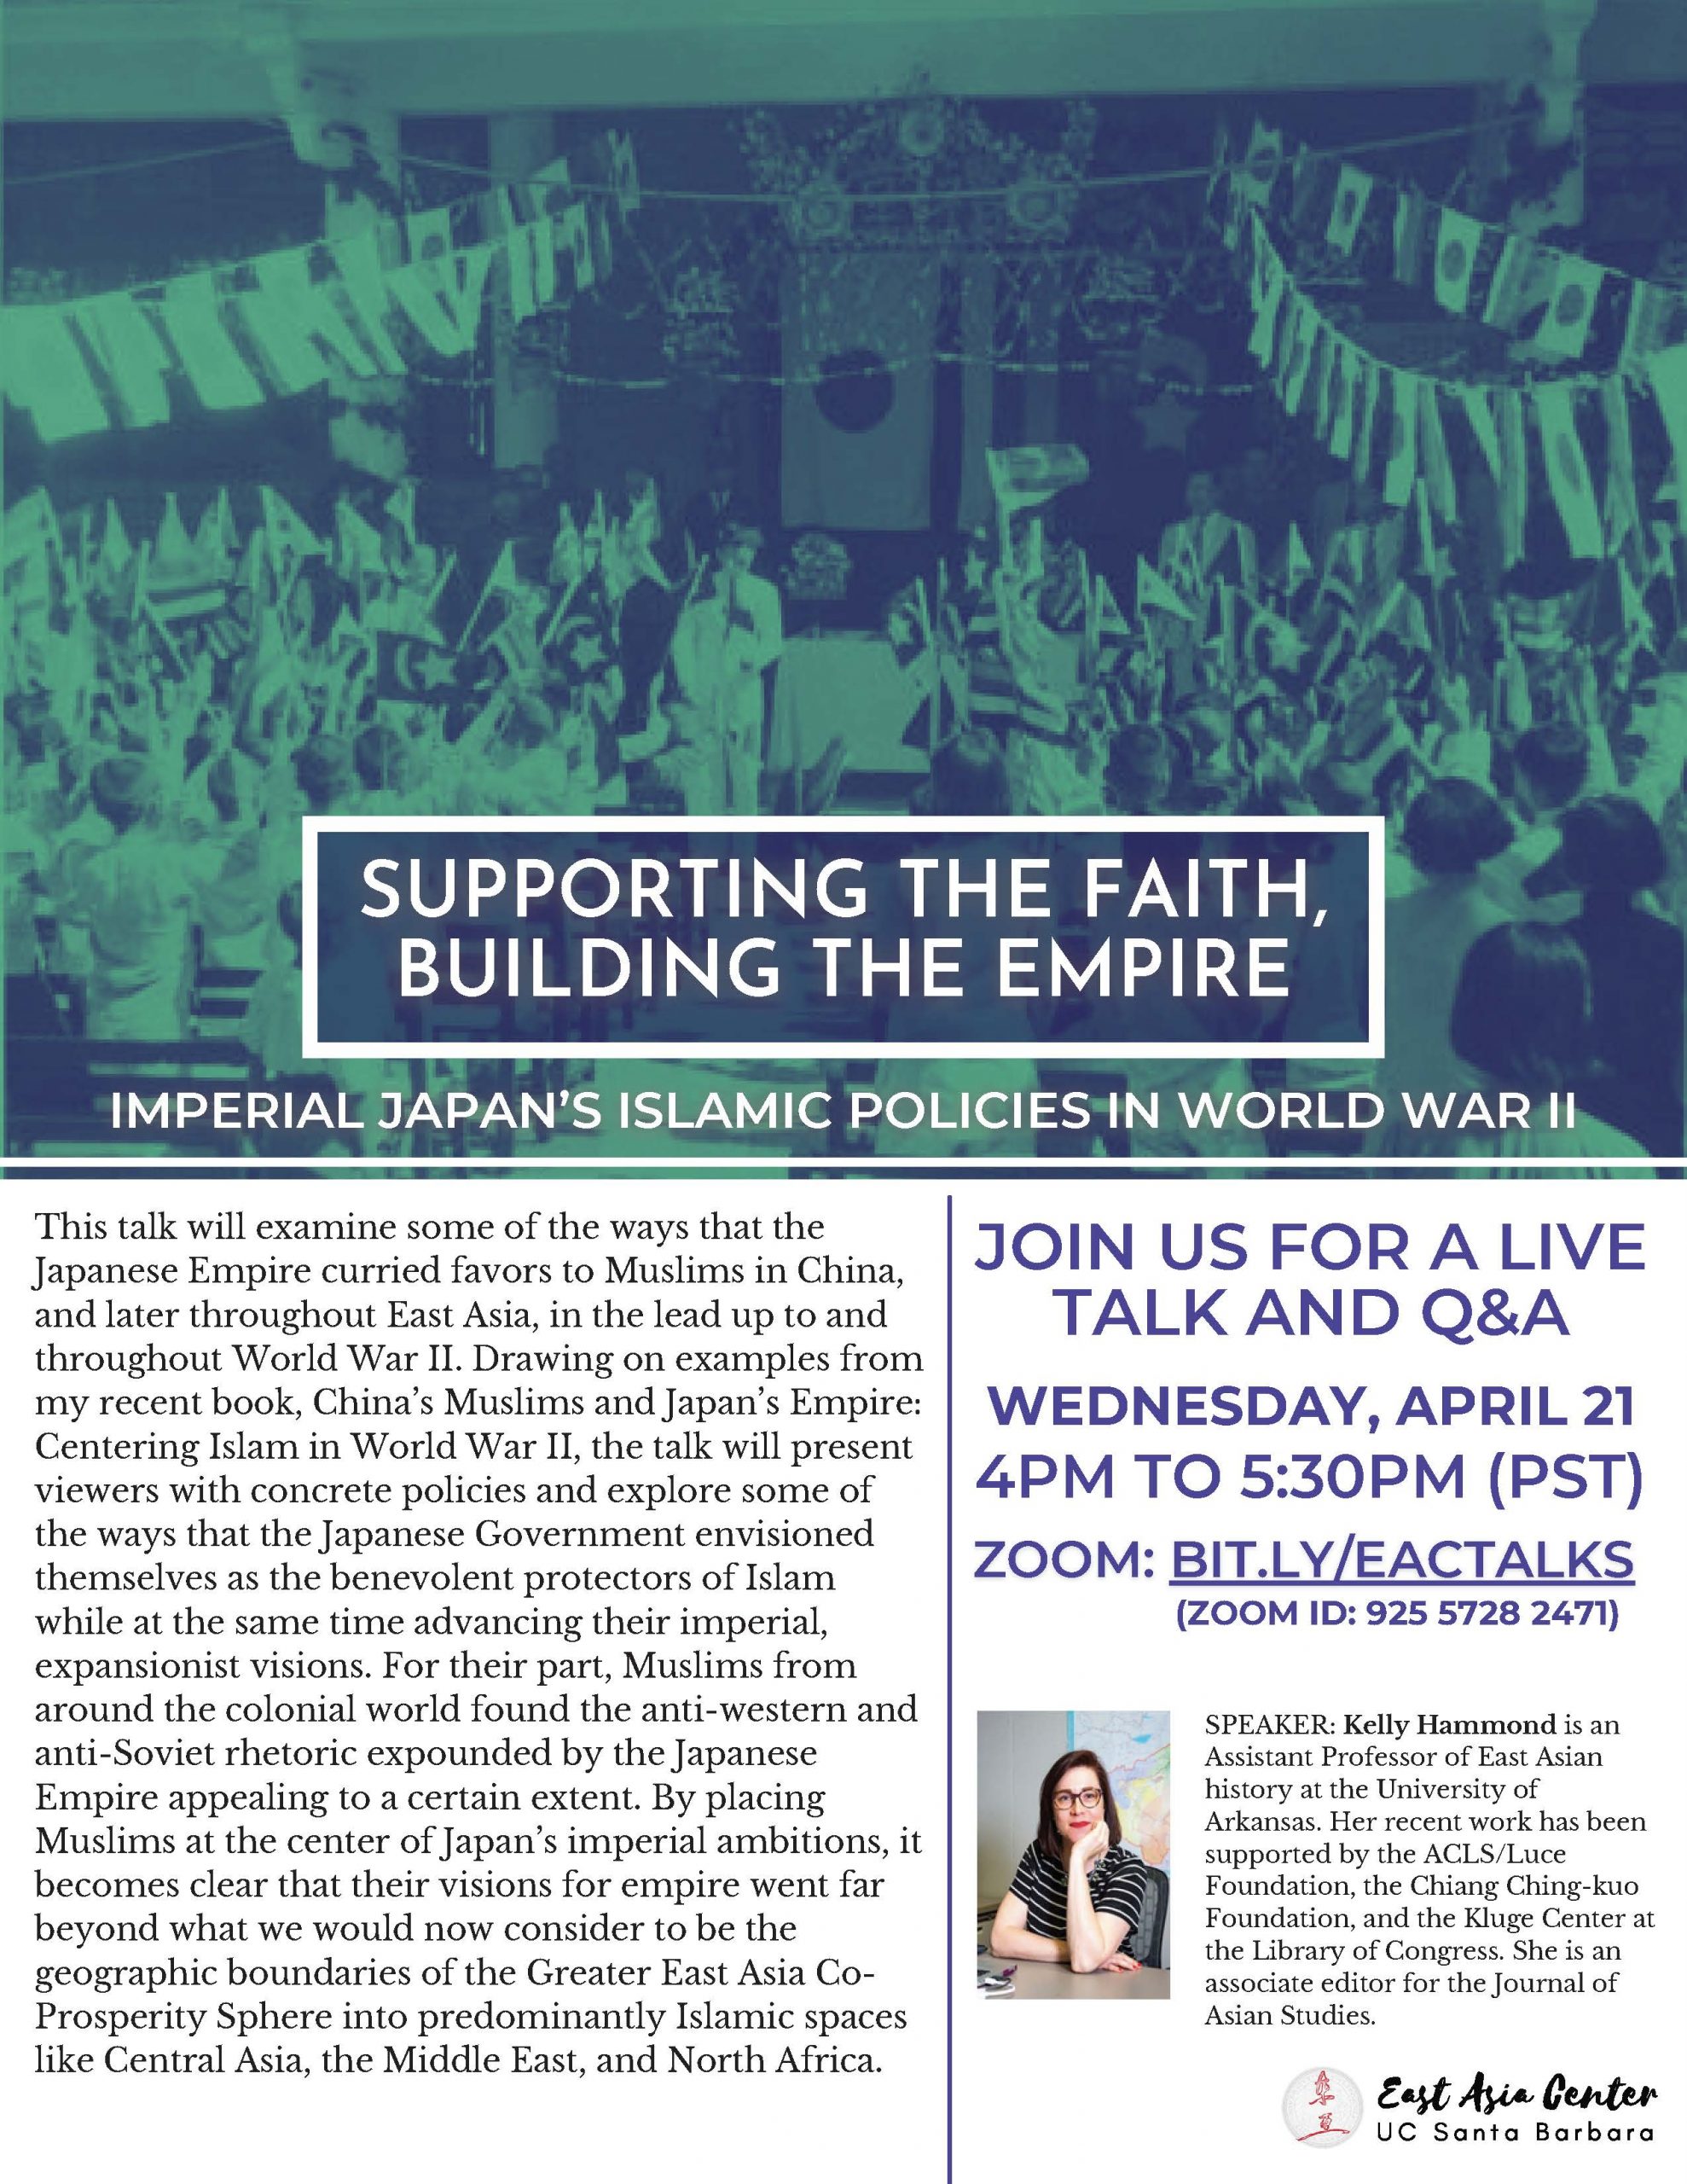 Flyer for Zoom talk "Supporting the Faith, Building the Empire: Imperial Japan's Islamic Policies in World War II" on 4/21 from 4PM to 5:30PM